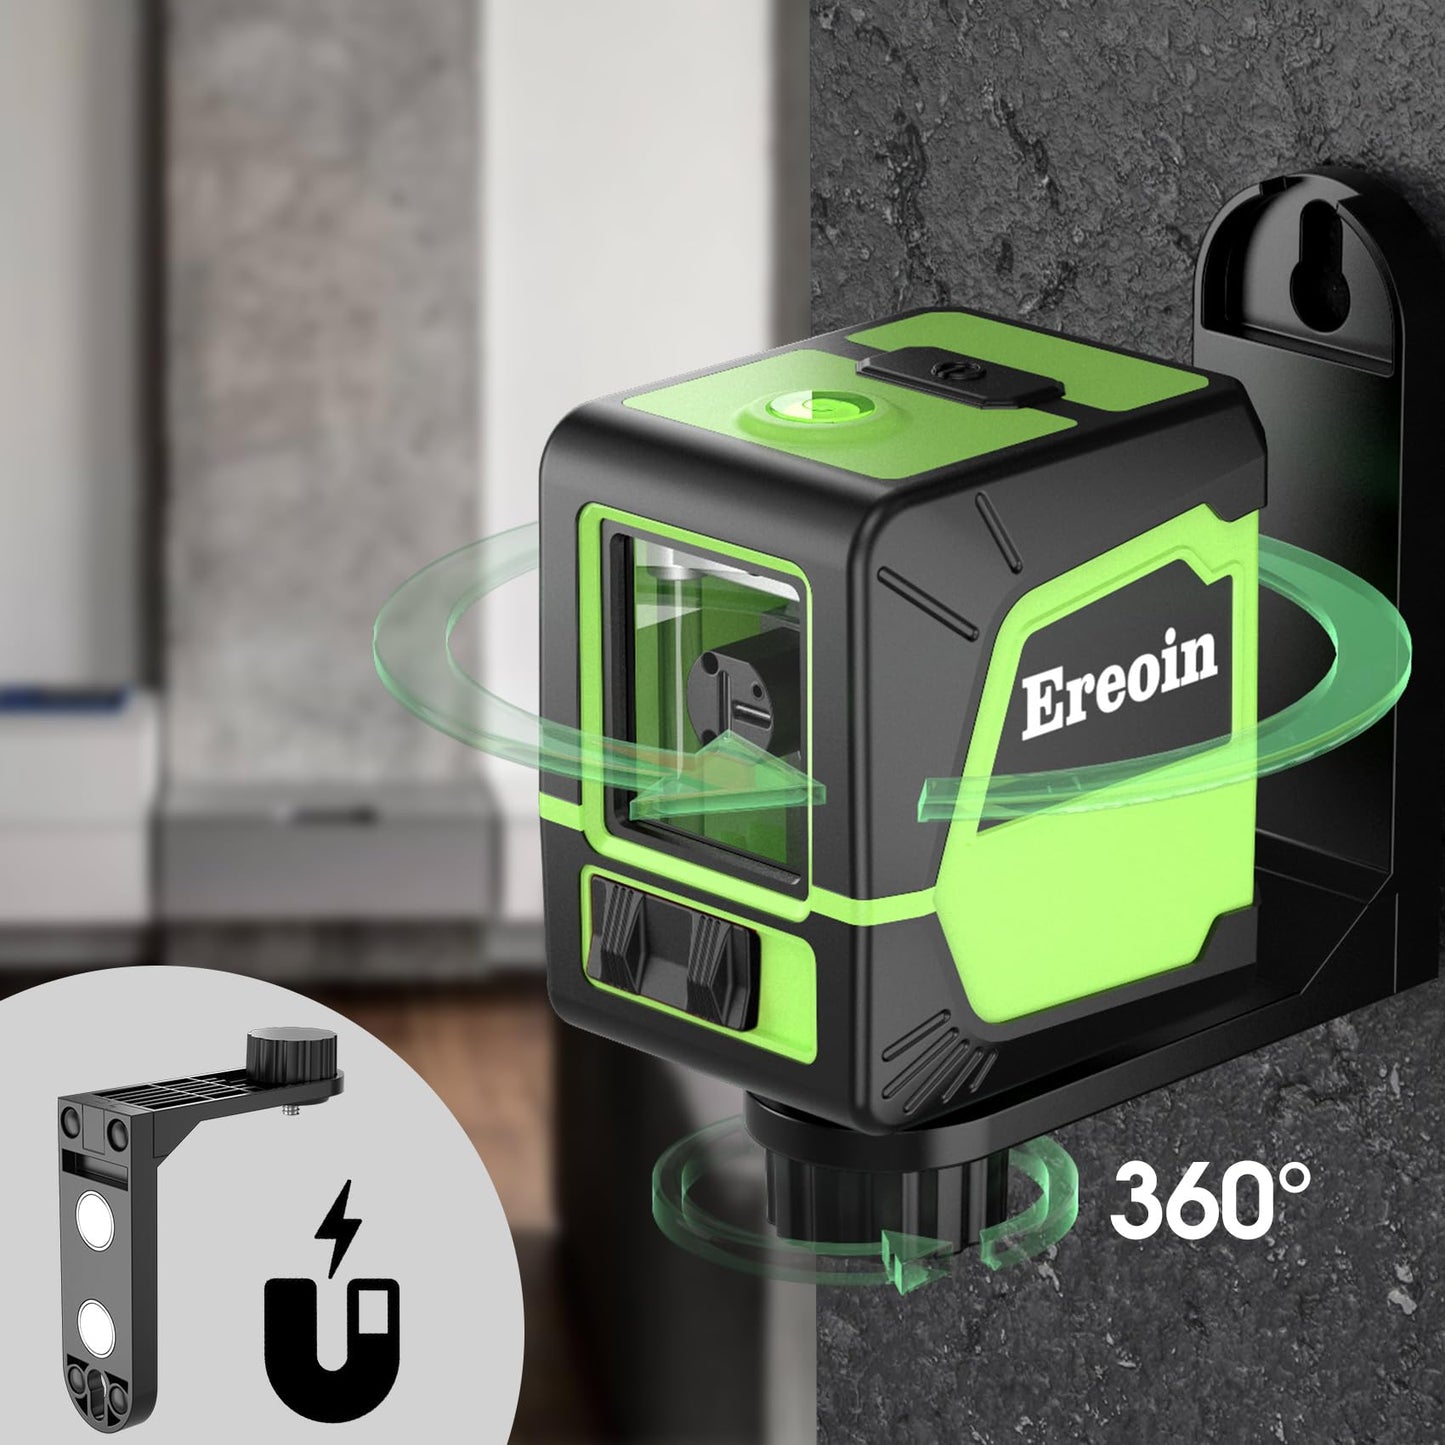 Laser Level Self-leveling Green Cross laser tool with vertical and horizontal lines,360 degree rotation self-leveling mode&IP54 waterproof for